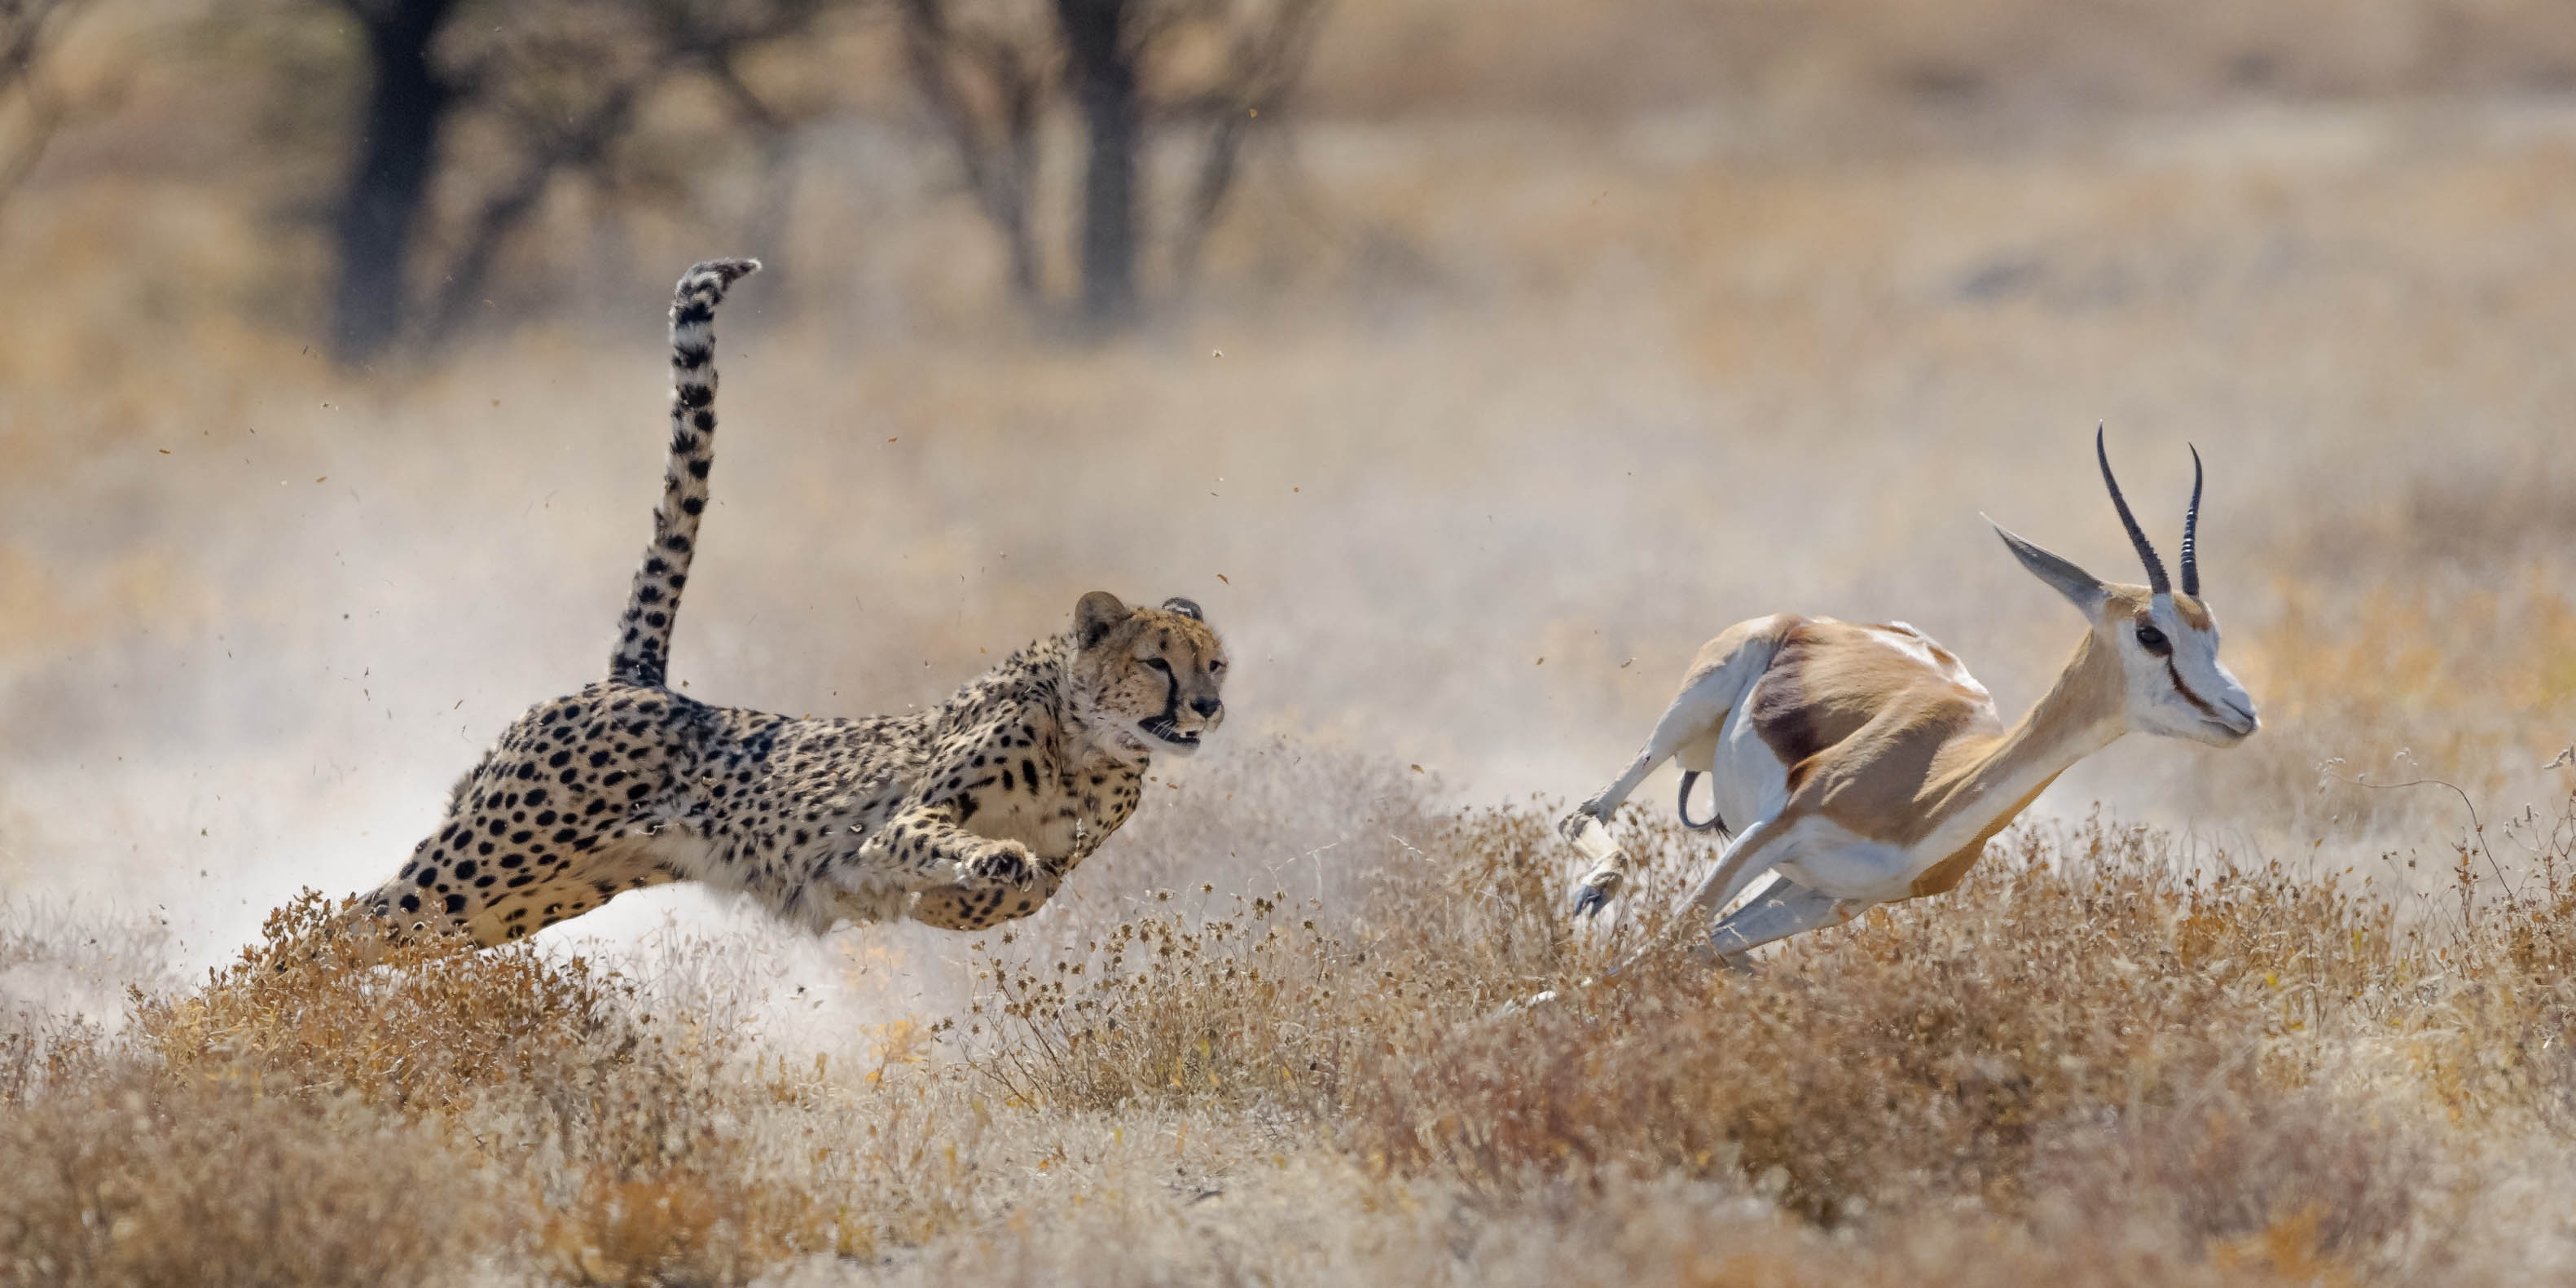 Cheetah chasing a gazelle in nature